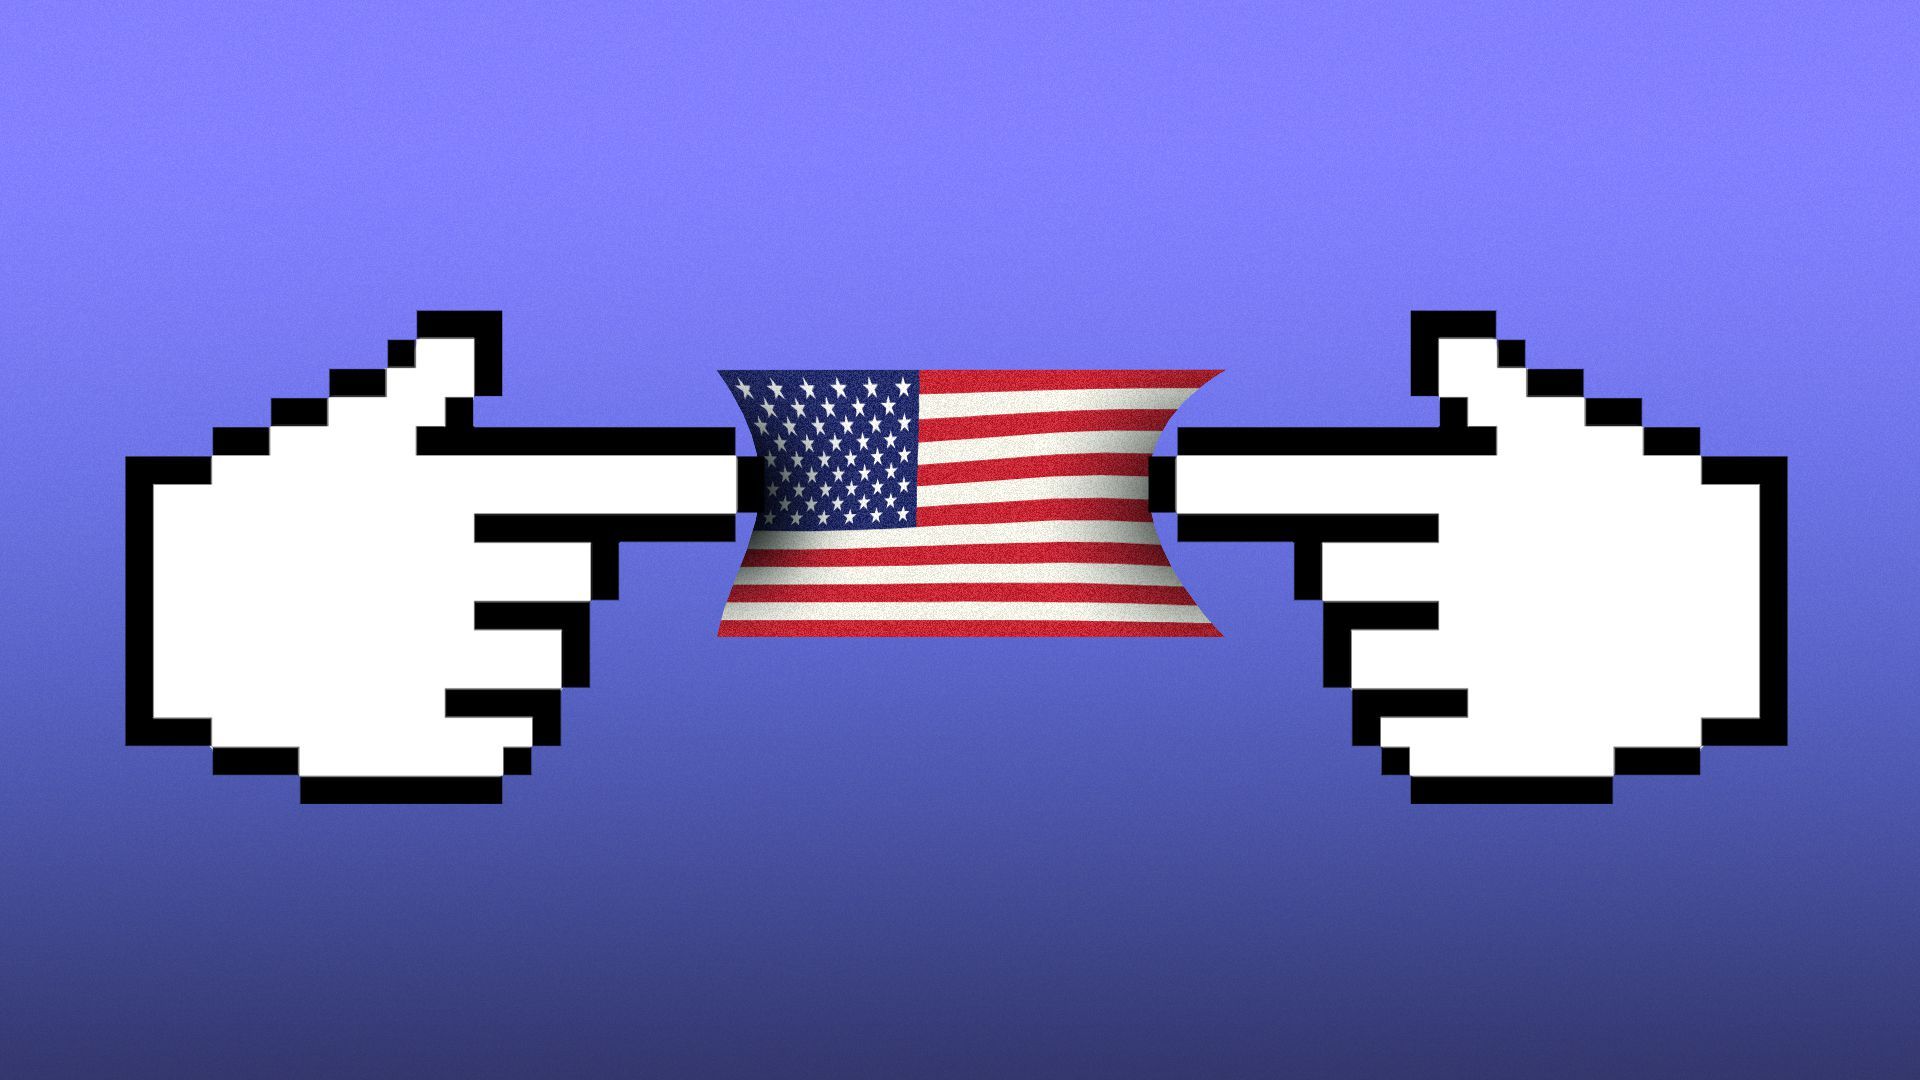 Illustration of two hand cursor arrows pushing an American flag into a squeezed shape